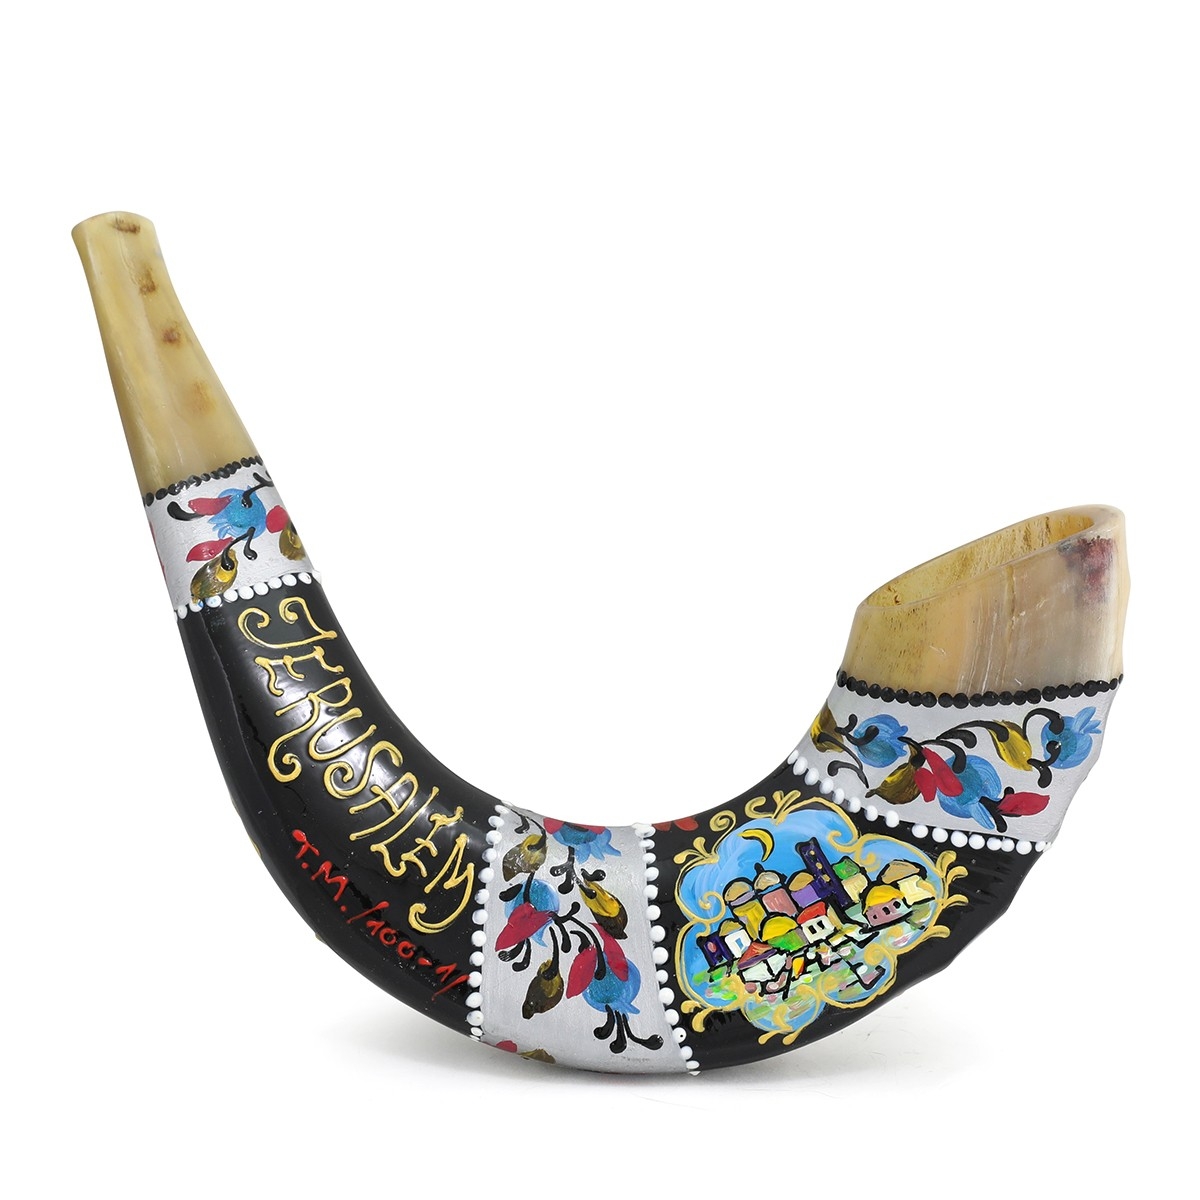 Hand Painted Ram’s Horn Shofar with Jerusalem and Floral Designs - 1